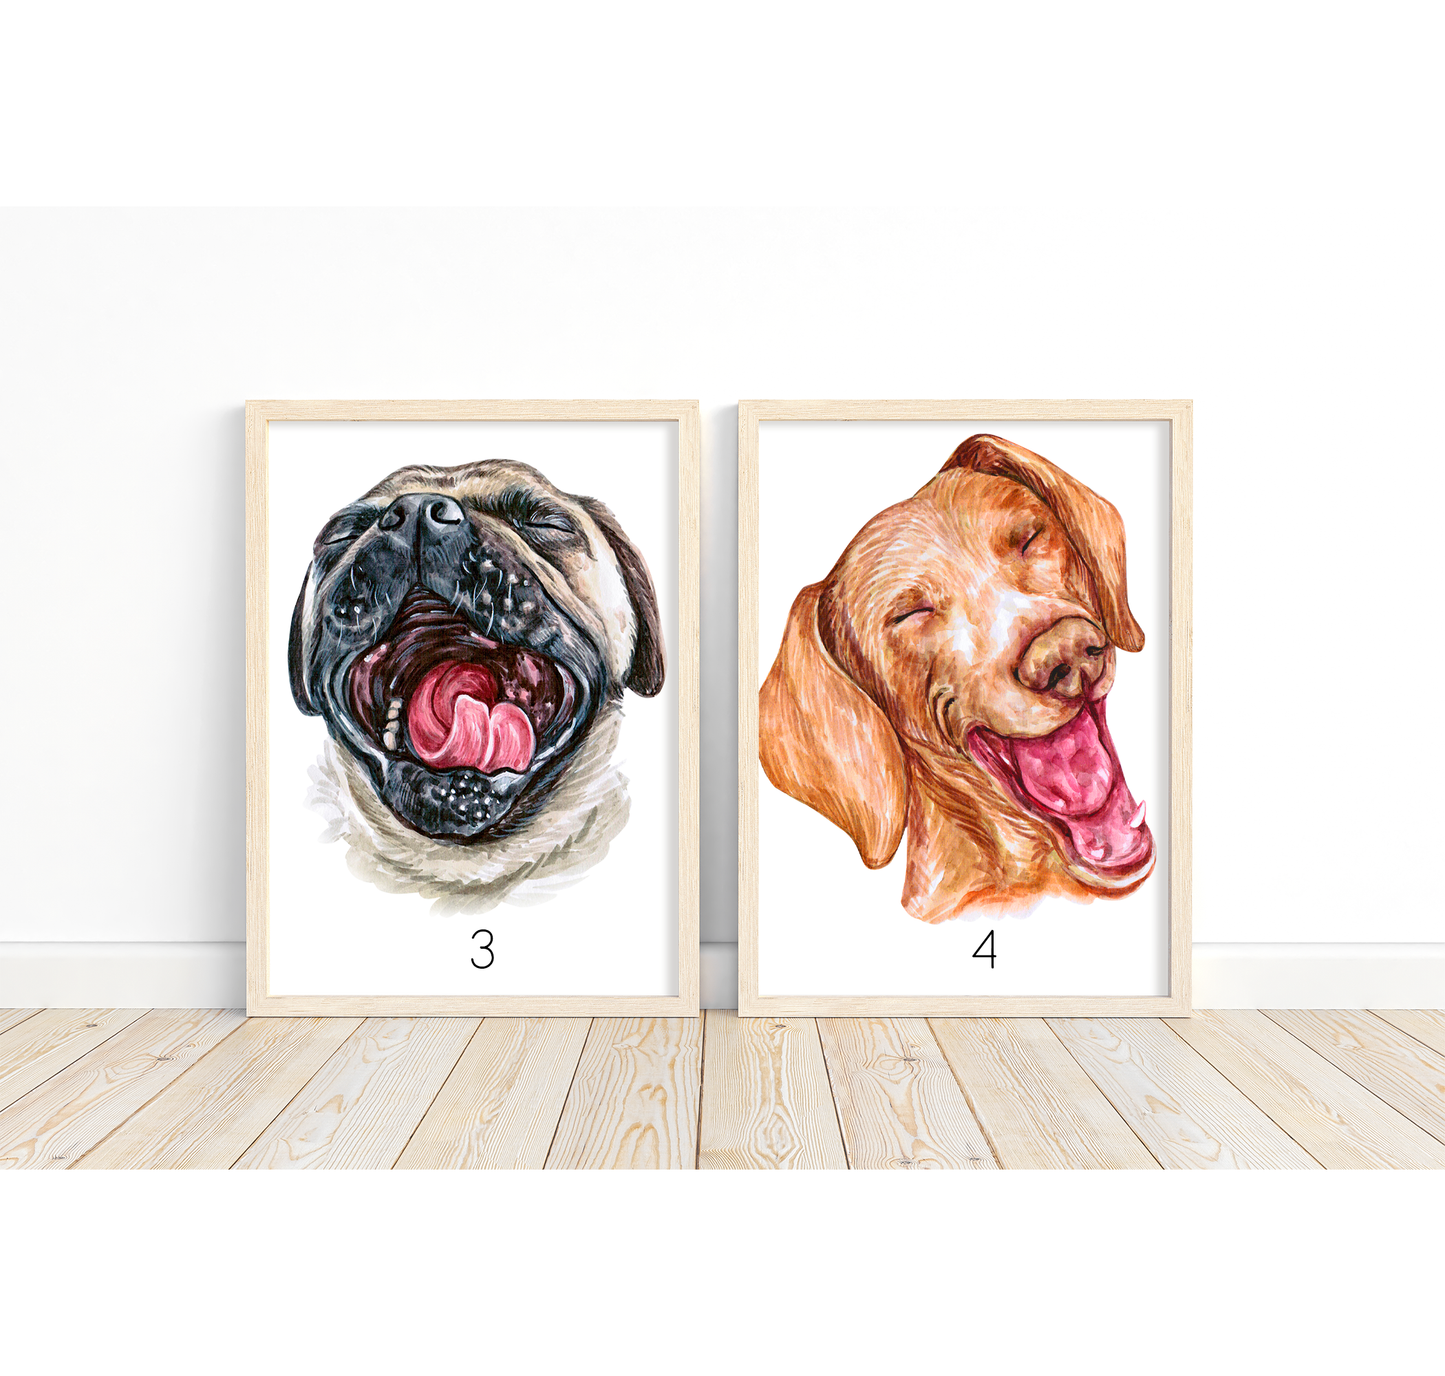 Yawning dog artwork - adorable portraits of dogs having a yawn with your own custom funny message | A4 | A5 | Greeting card